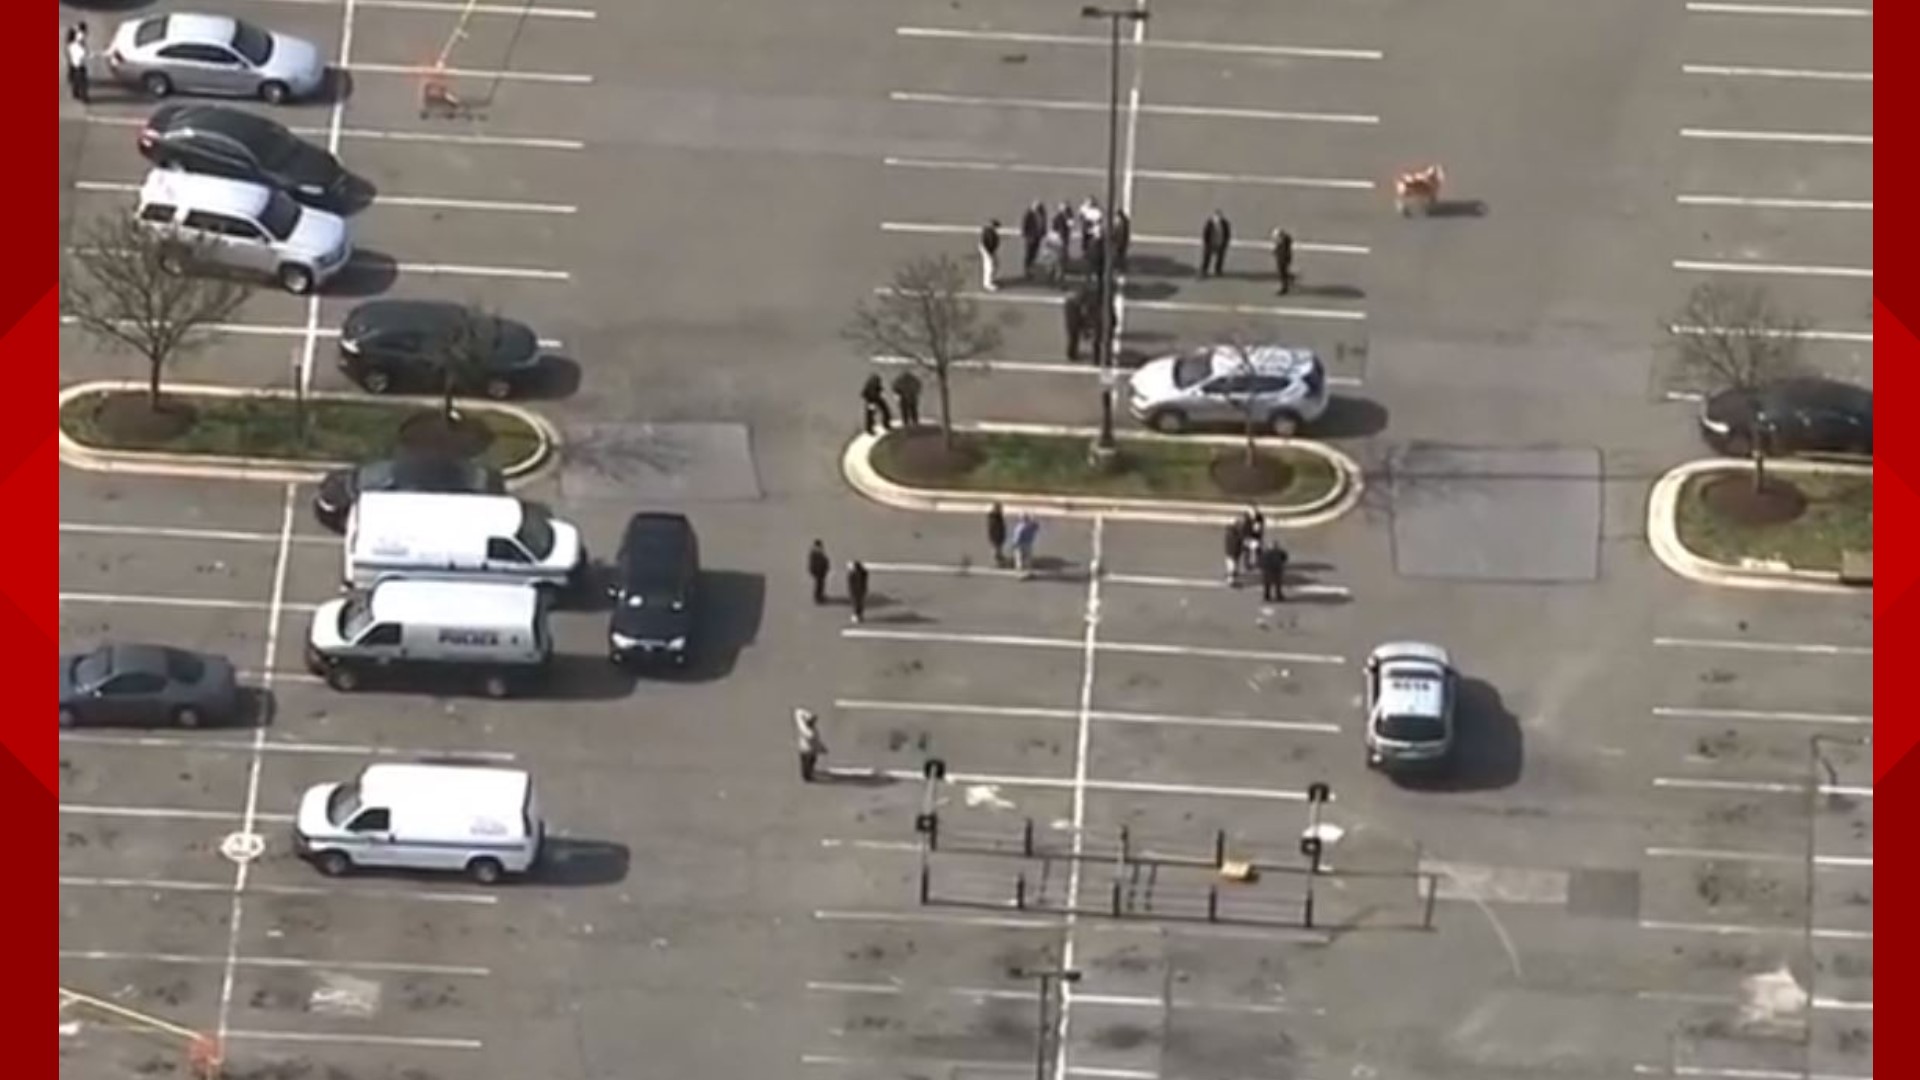 Prince George's County Police Department say shooting happened at a Home Depot in College Park, Maryland